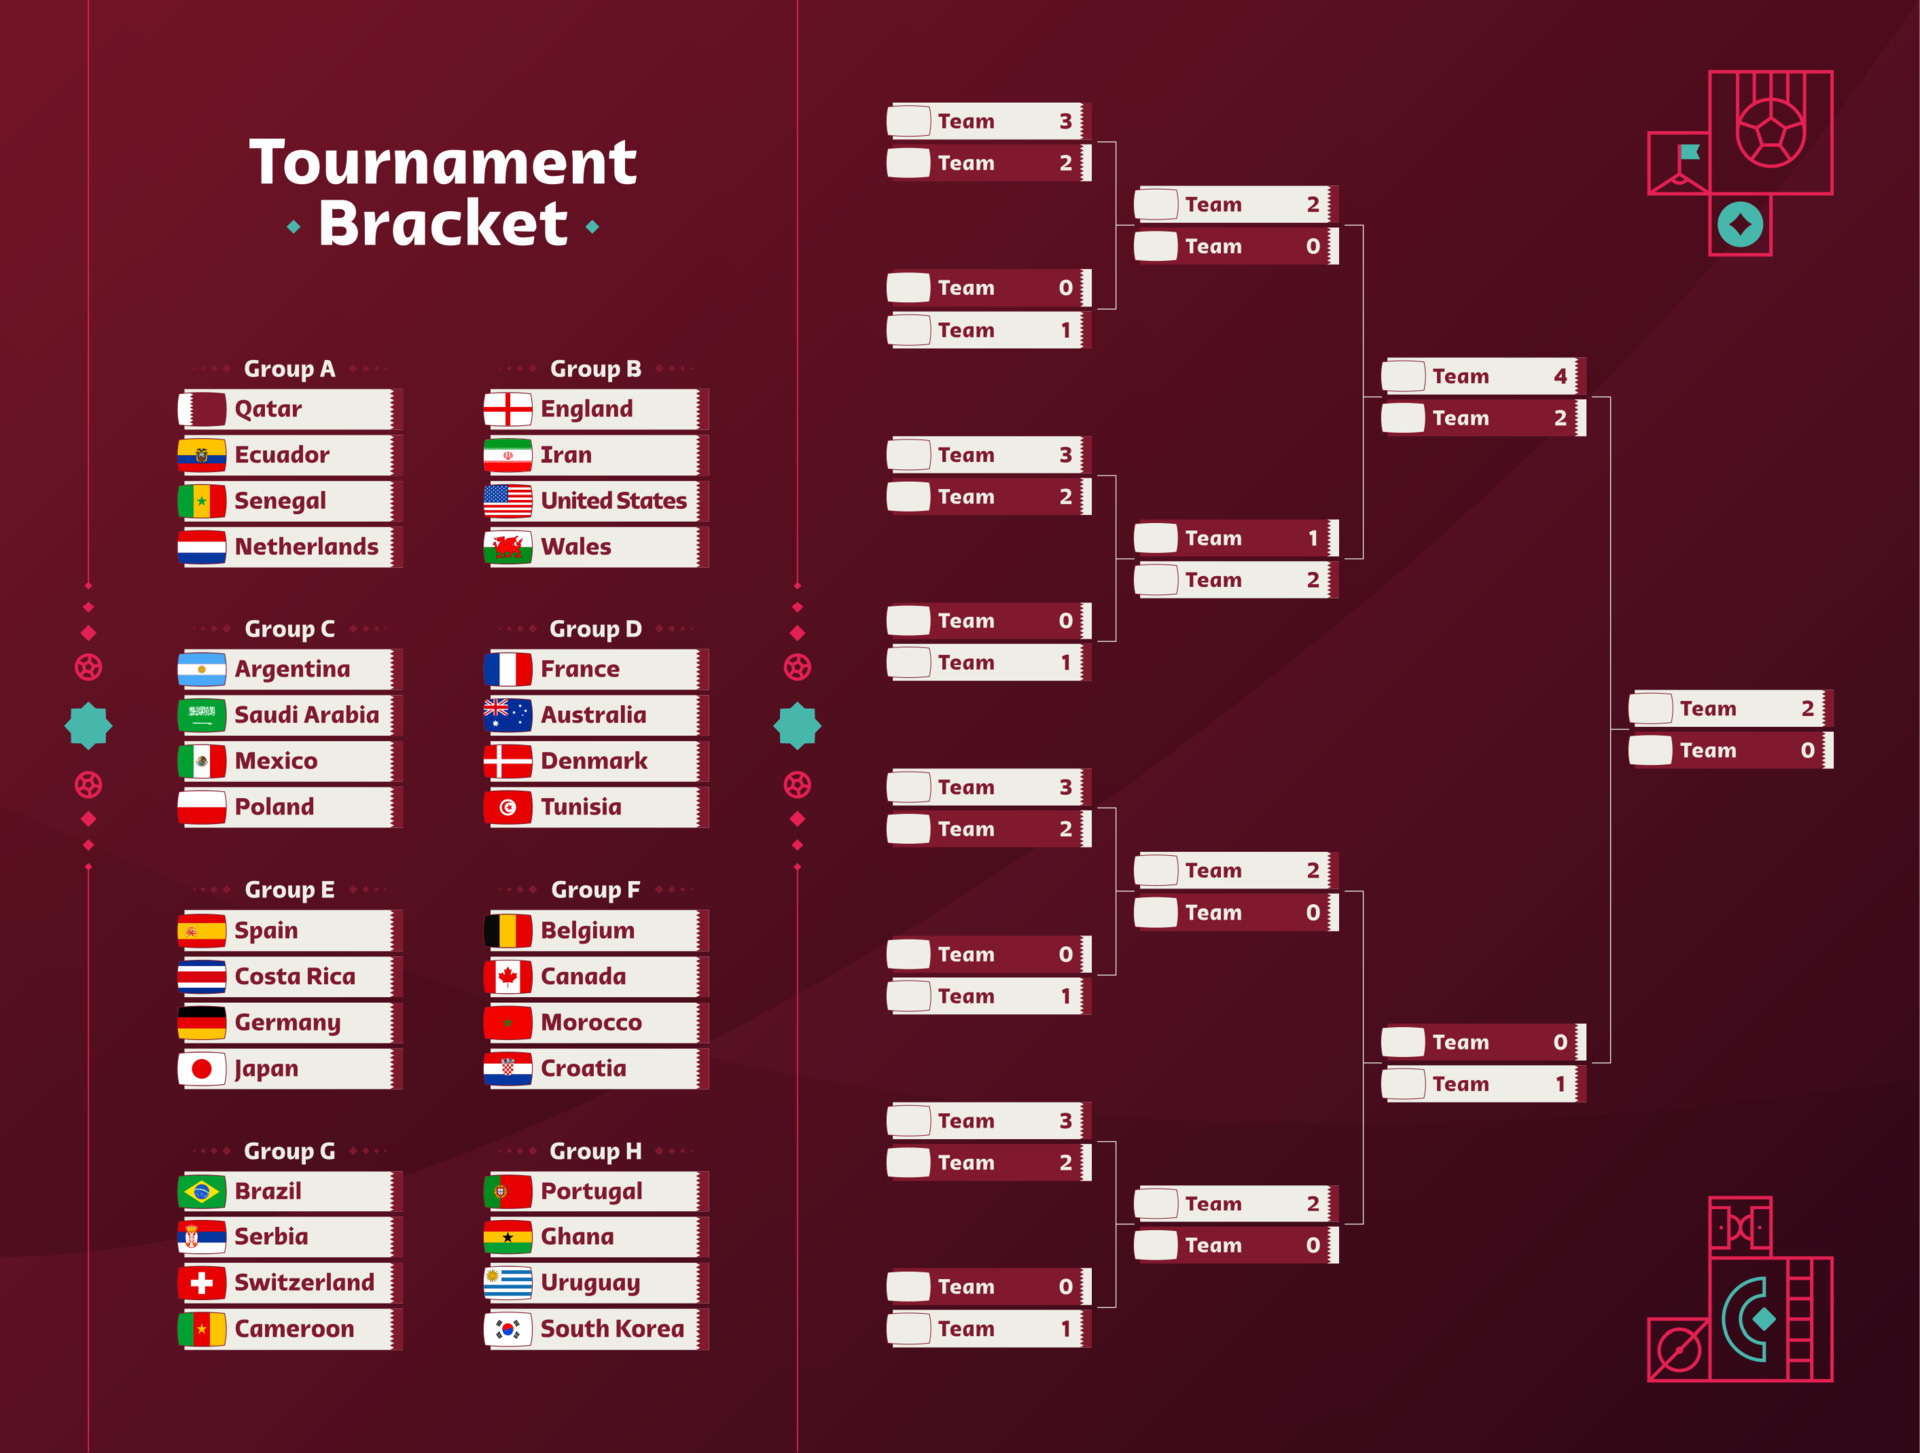 World Football 2022 playoff match schedule with groups and national flags. Tournament bracket